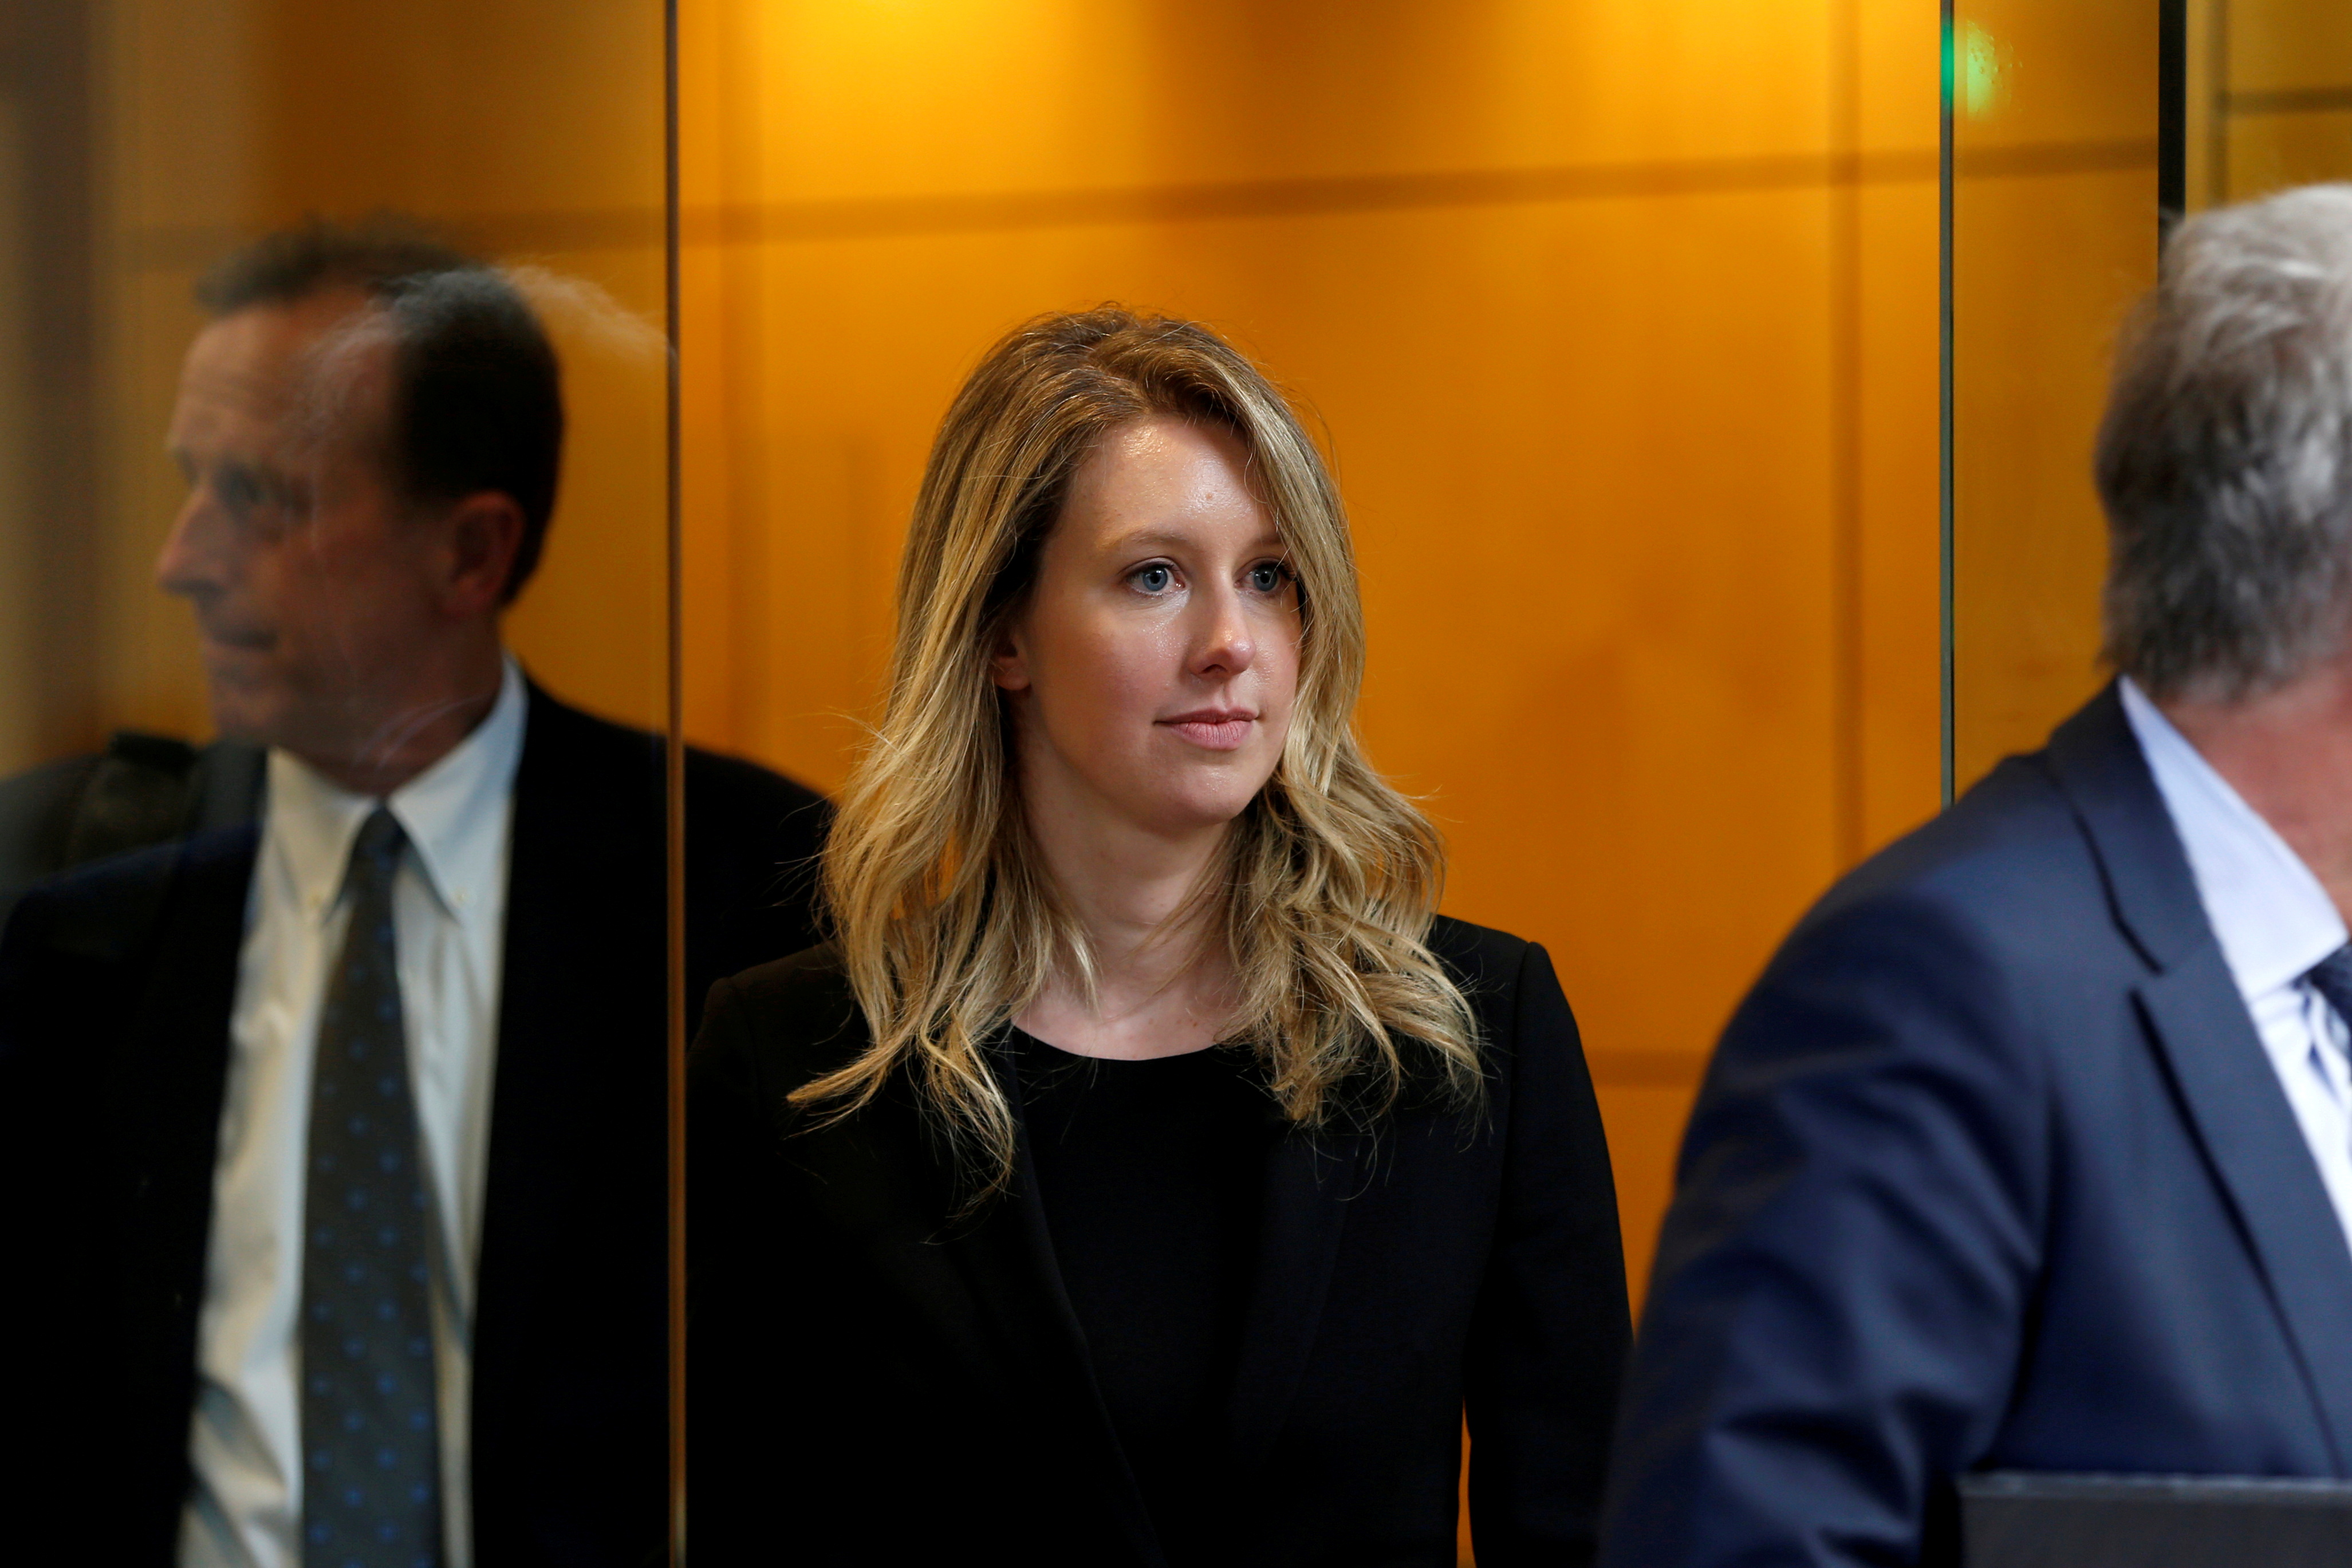 Former Theranos CEO Elizabeth Holmes leaves after a hearing at a federal court in San Jose